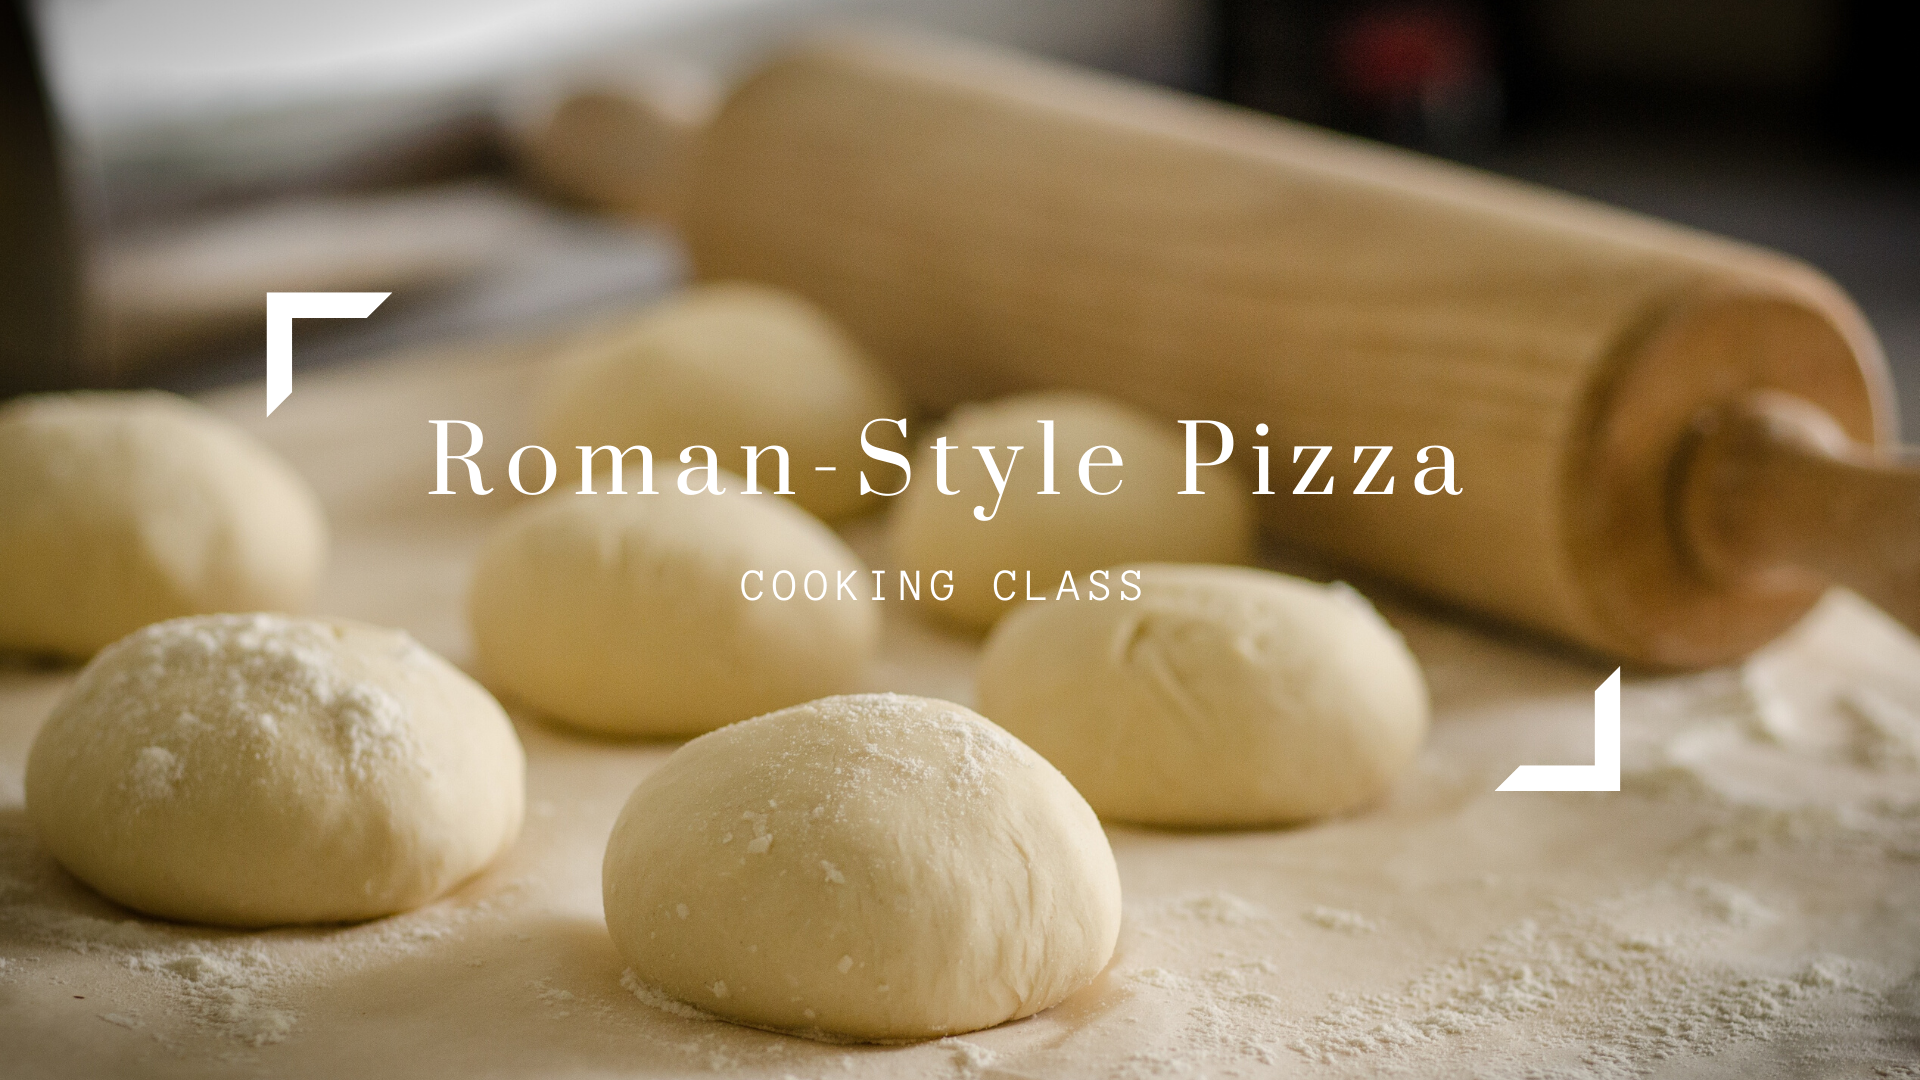 Roman-Style Pizza Cooking Class